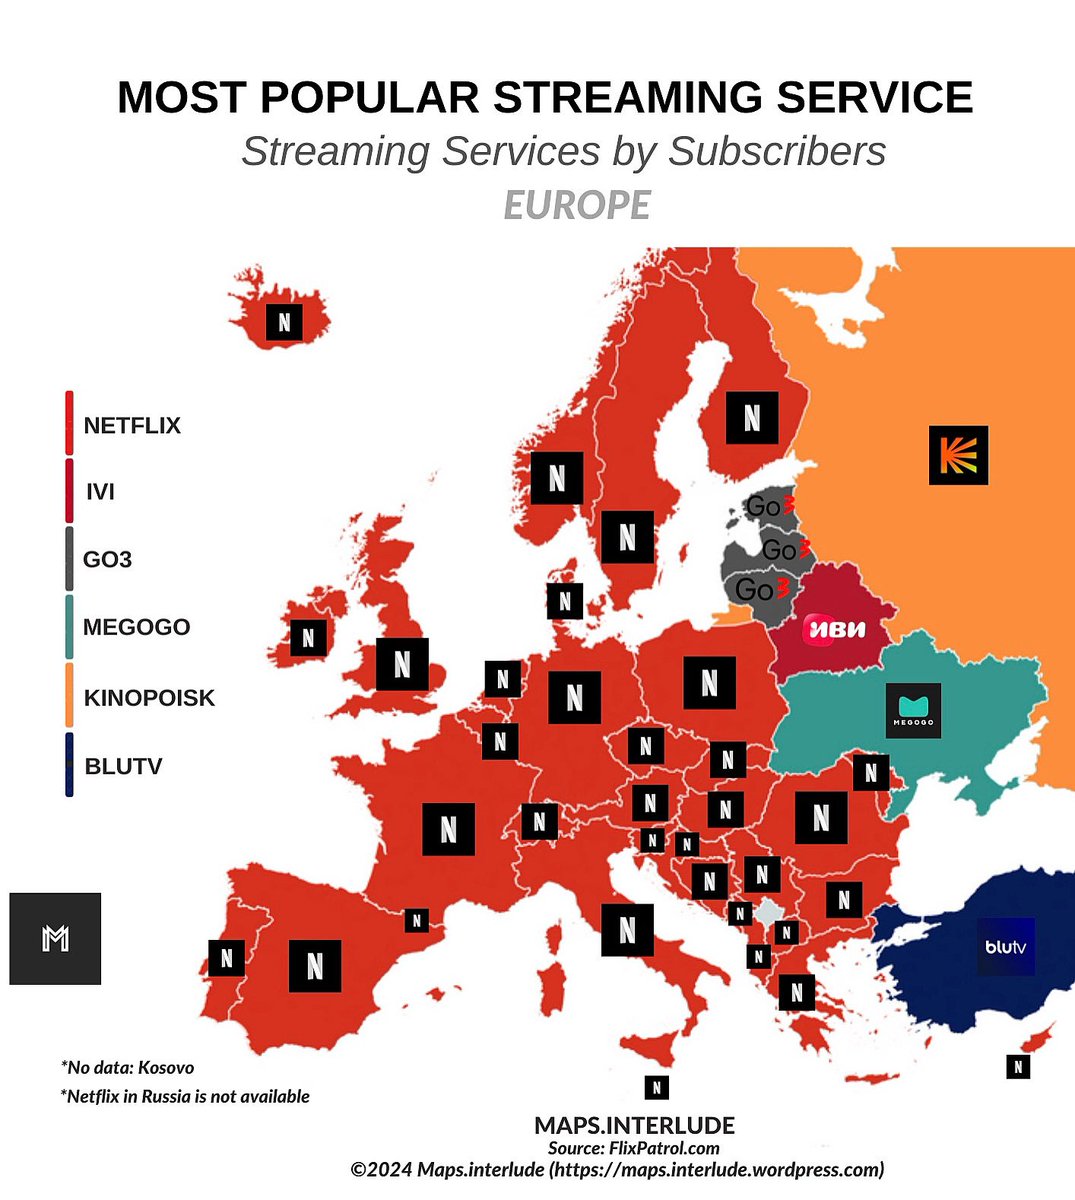 Most Popular #streaming service; #Streamingservices by Subscribers (#Europe) 
~
#maps #Netflix #go3 #ivi #megogo #blutv